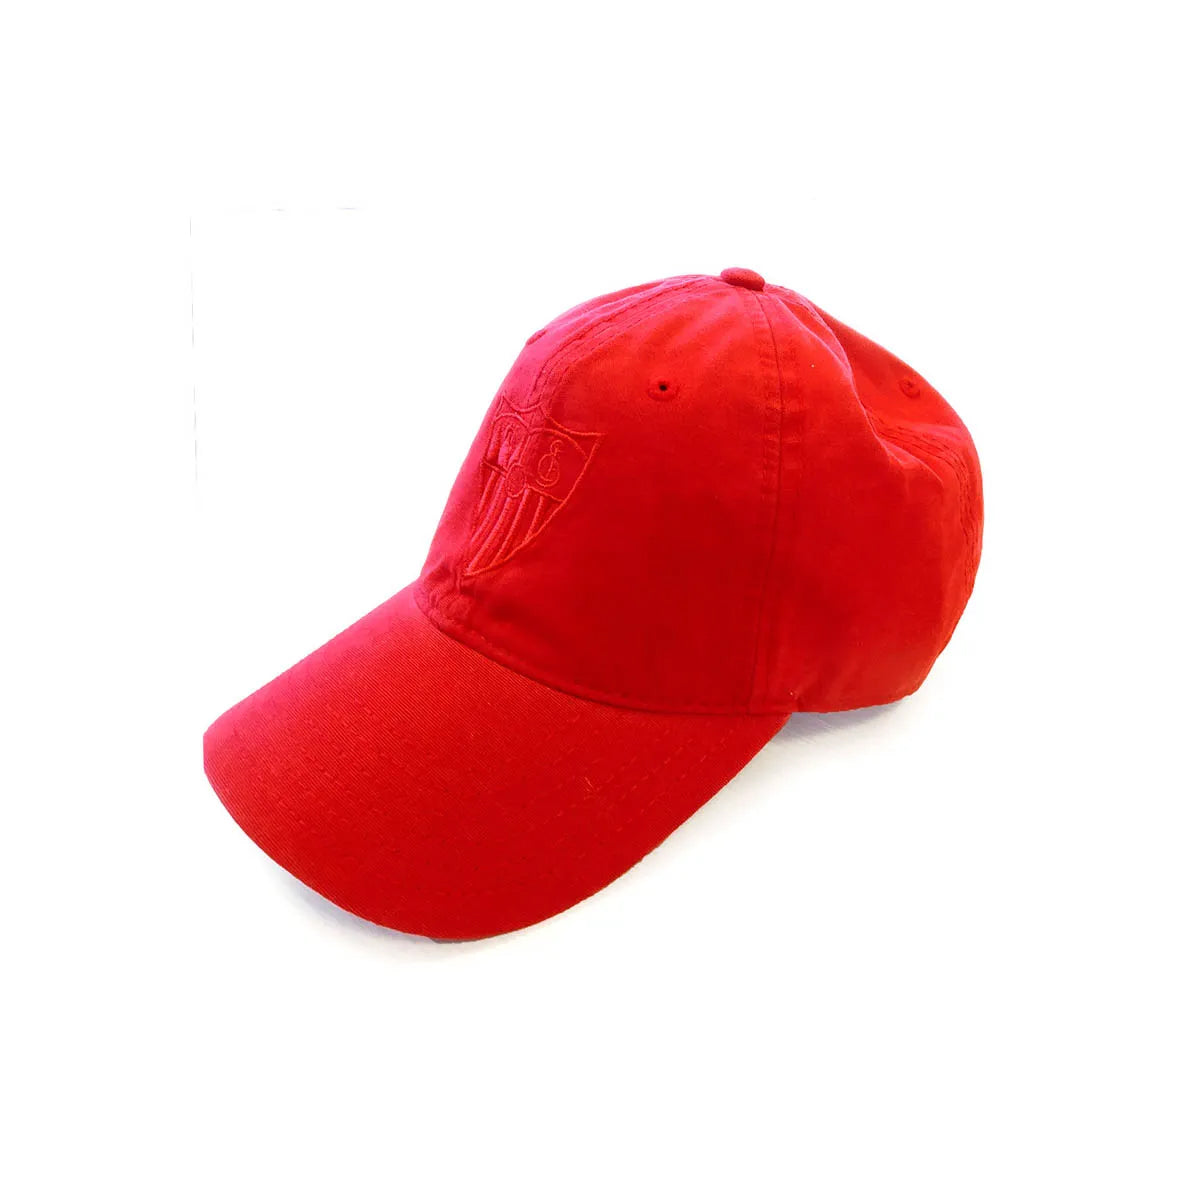 Red cap with embroidered crest